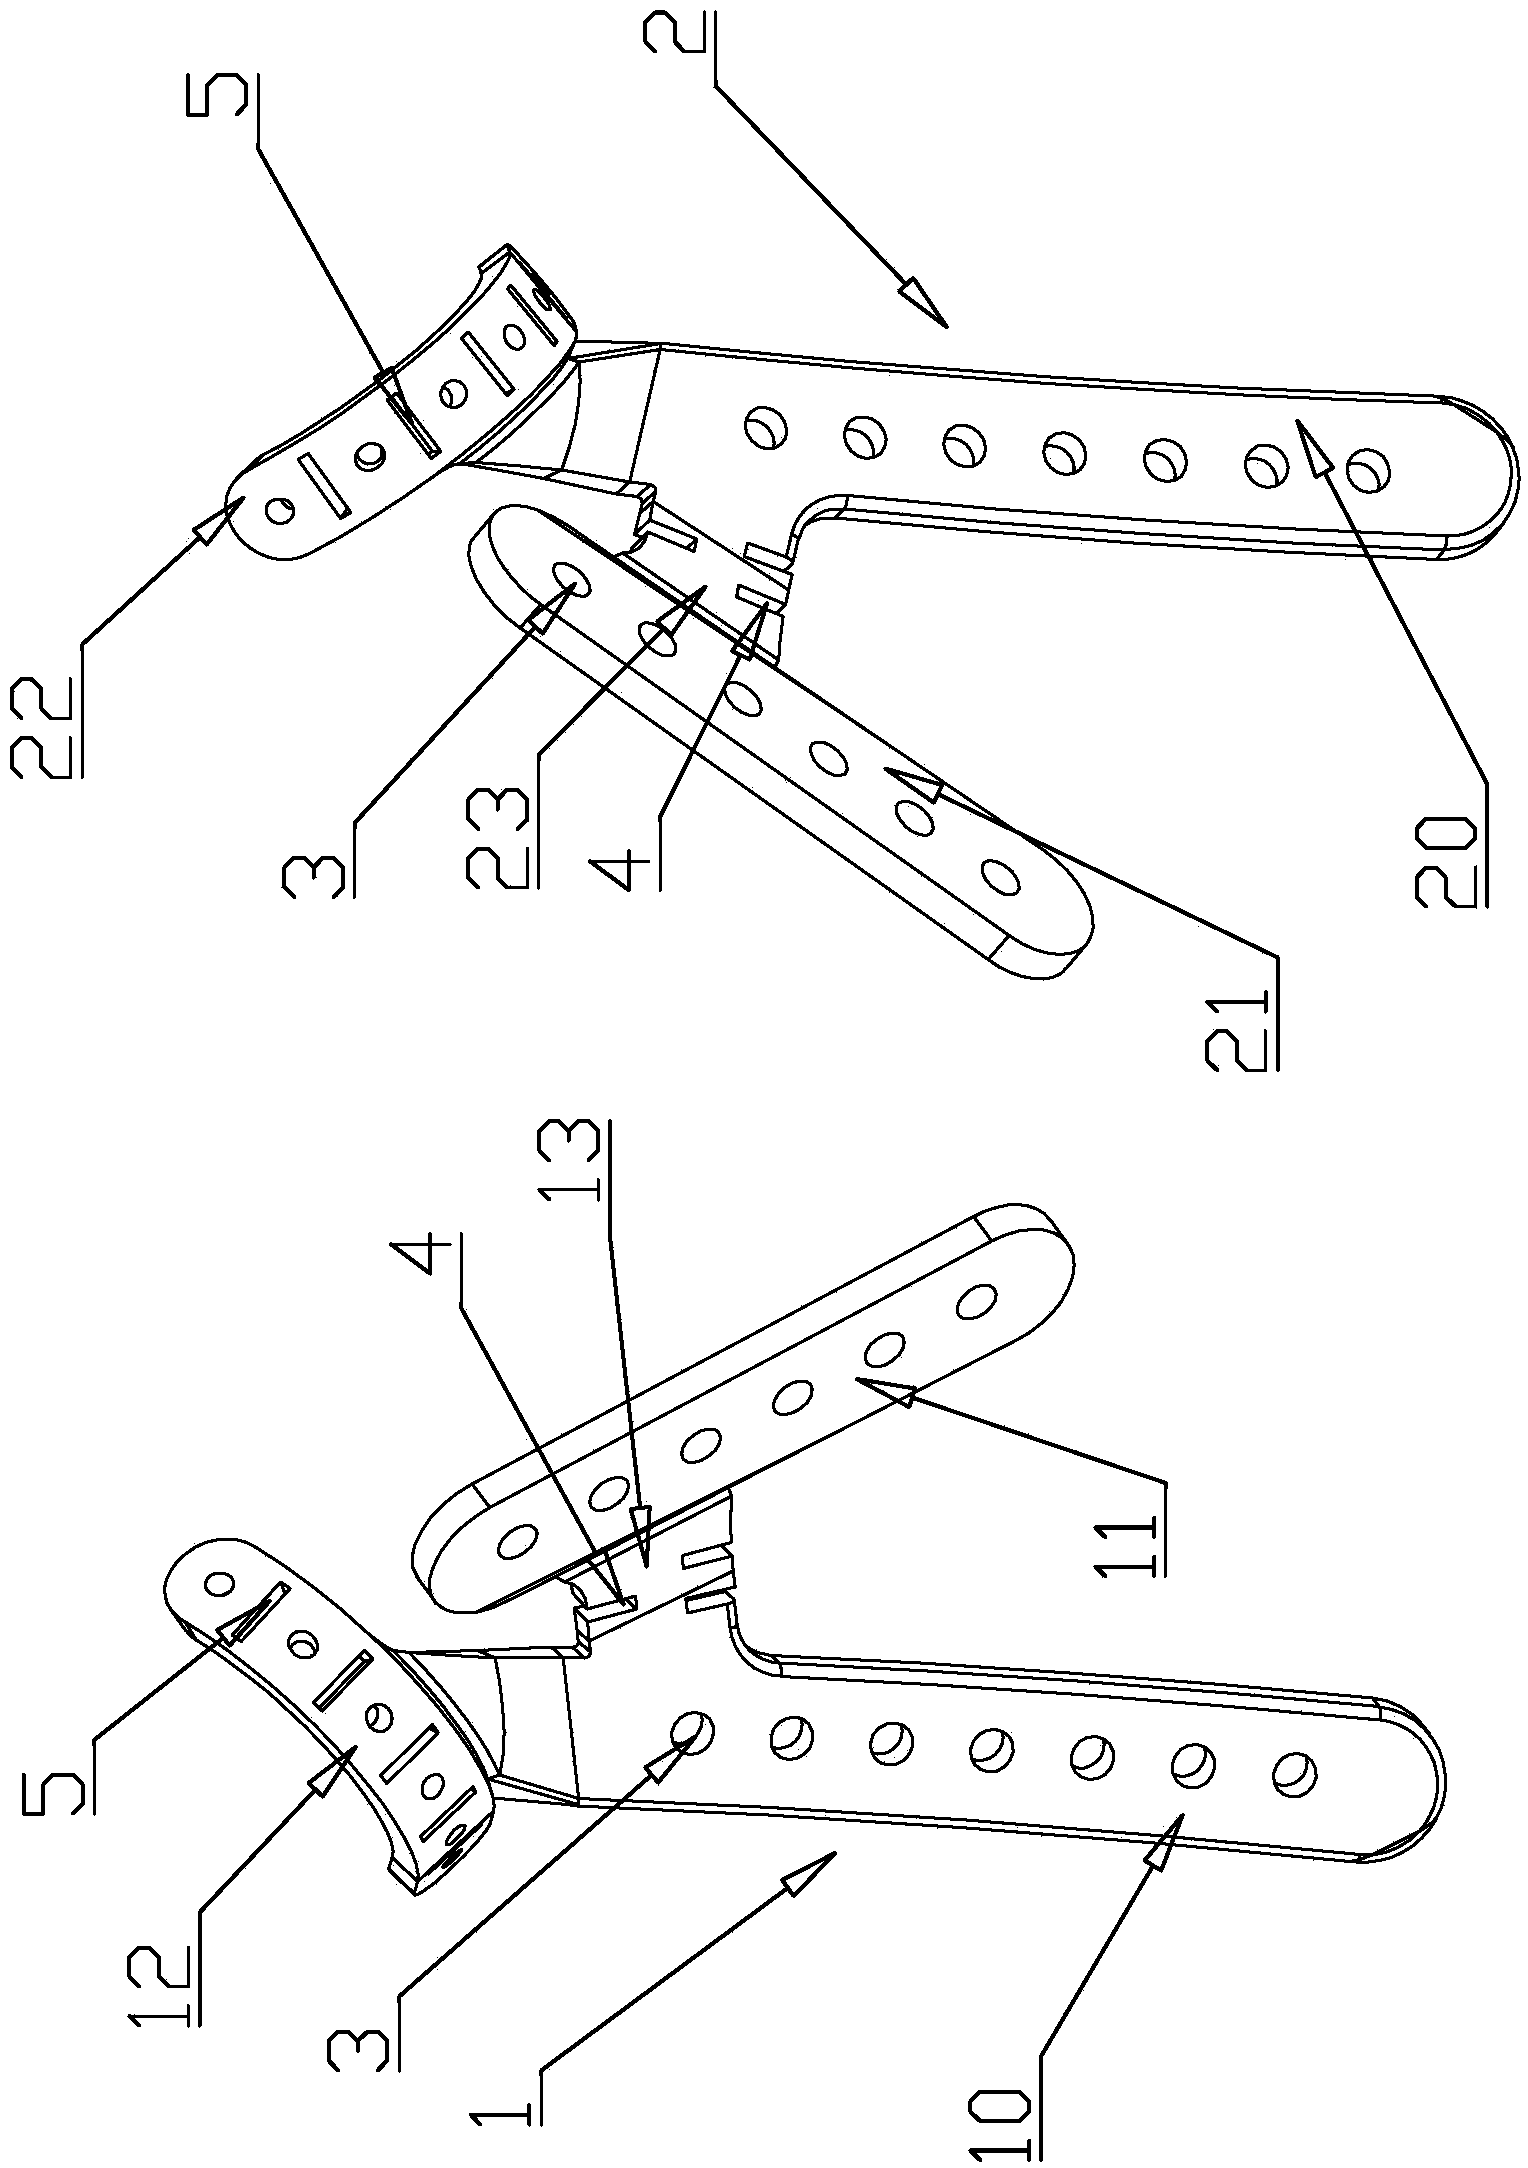 Auxiliary steel plate assembly for treatment of scapular fracture